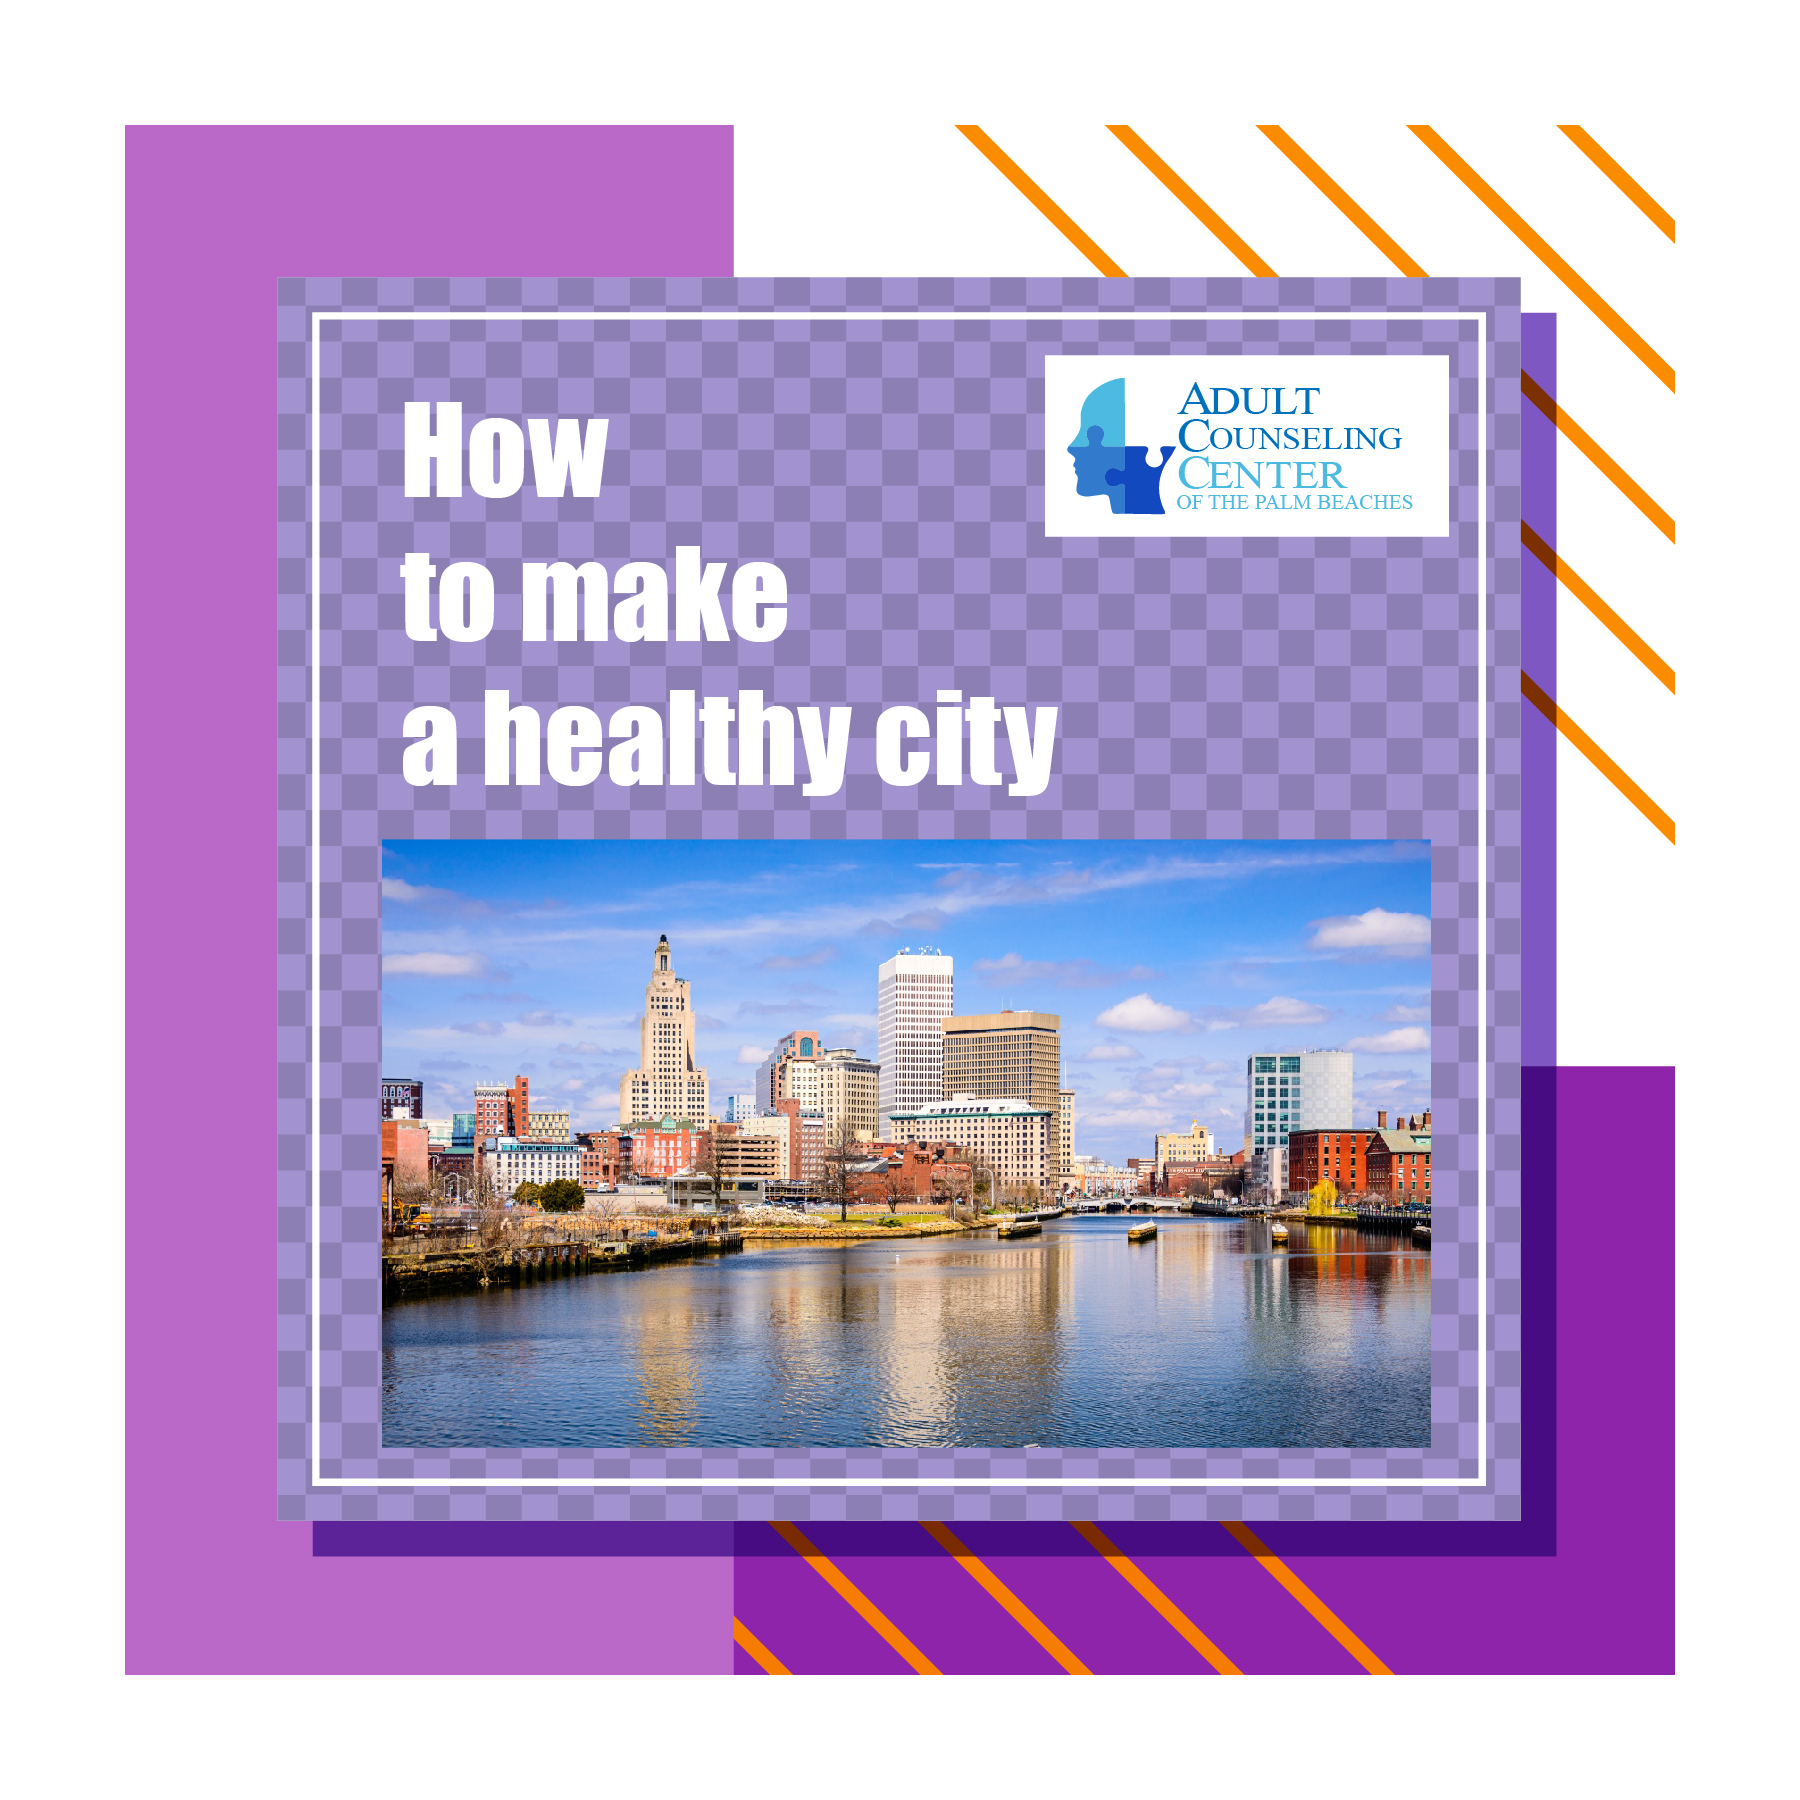 How to make a healthy city